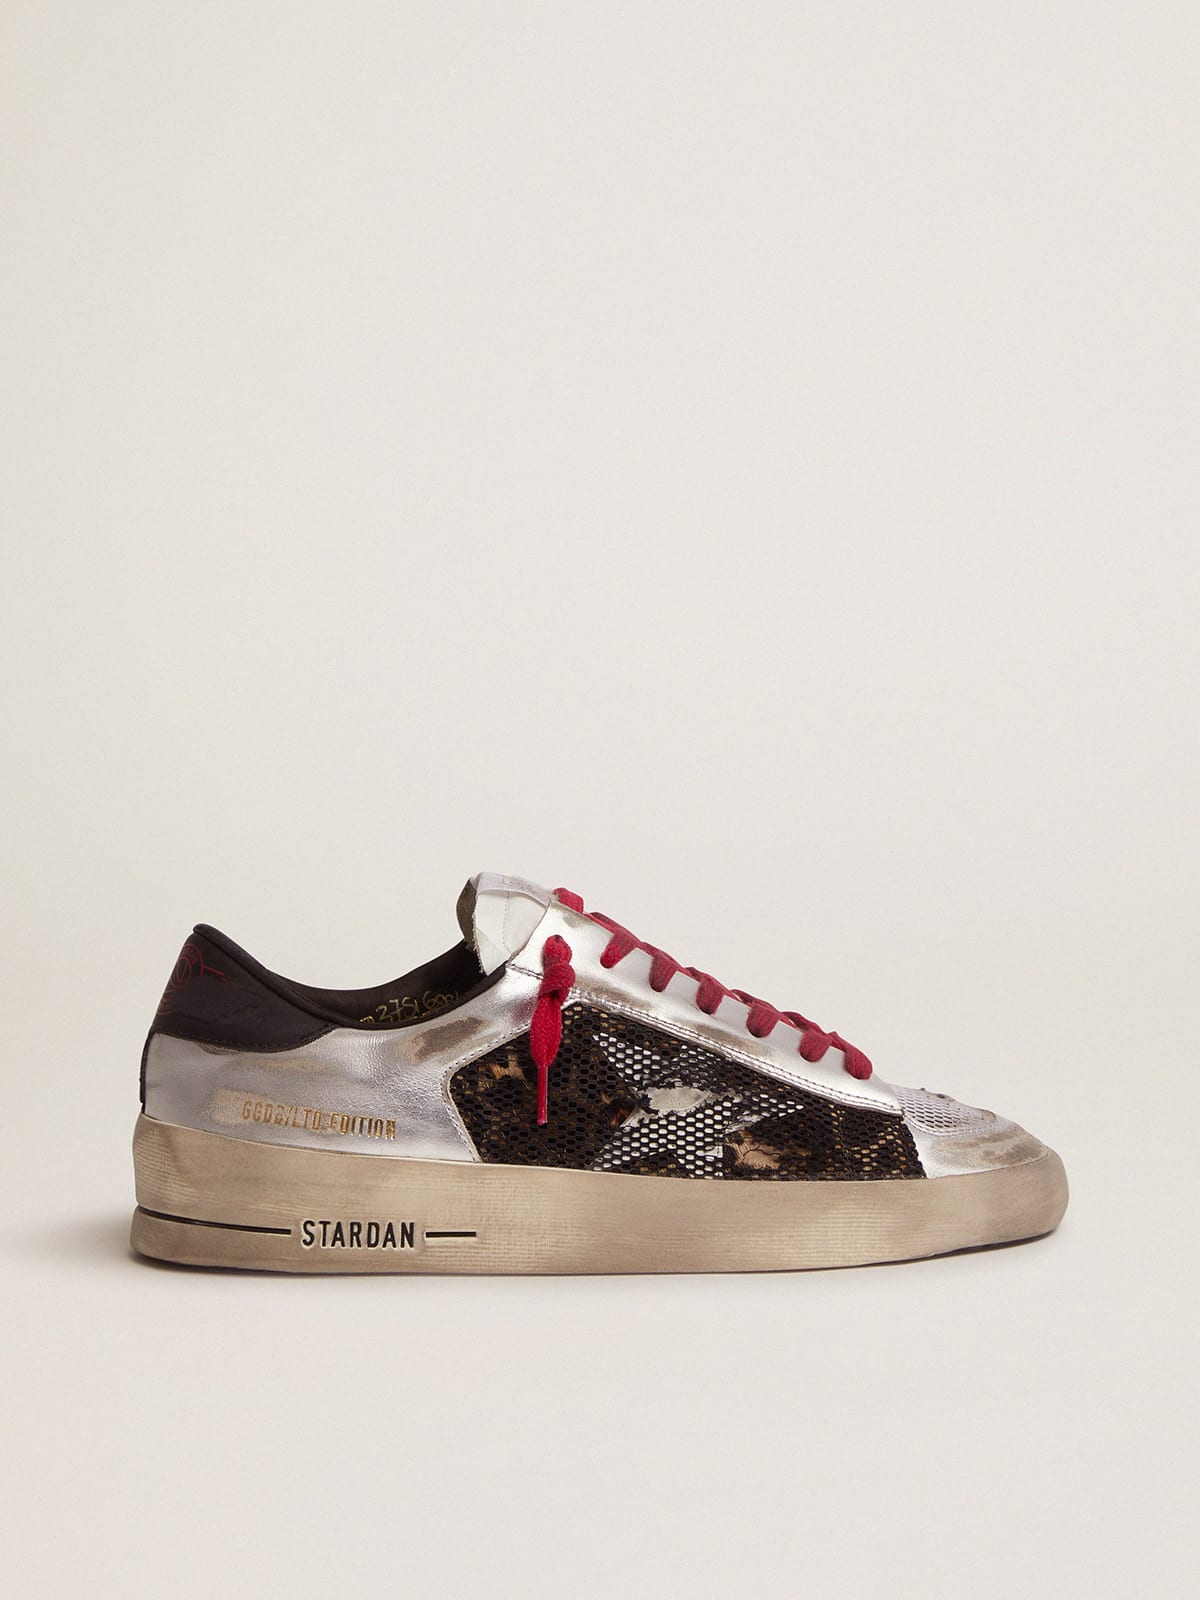 Golden Goose - Women's Limited Edition LAB silver and animal-print Stardan sneakers in 